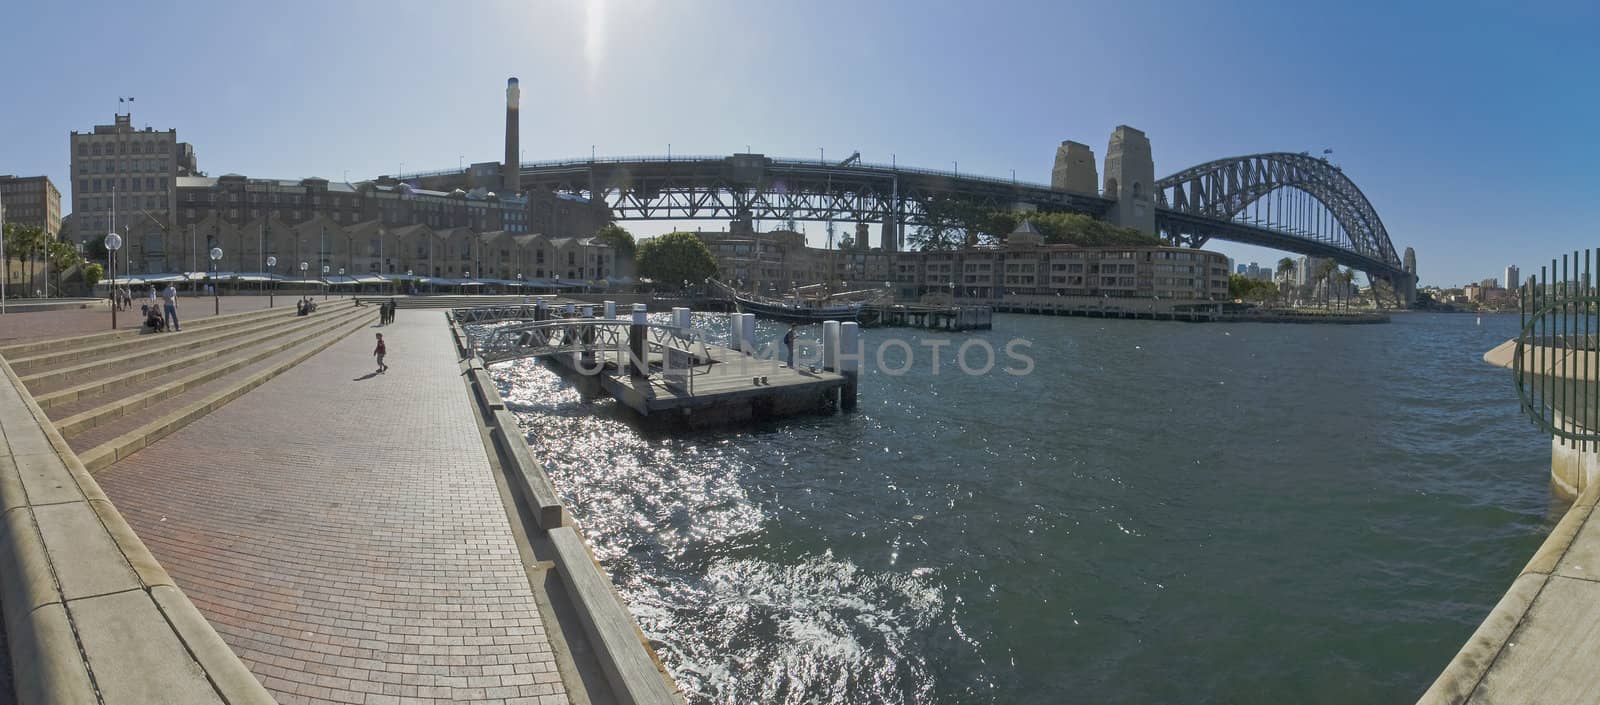 sydney panorama with harbour bridge in background, photo taken on circular quay